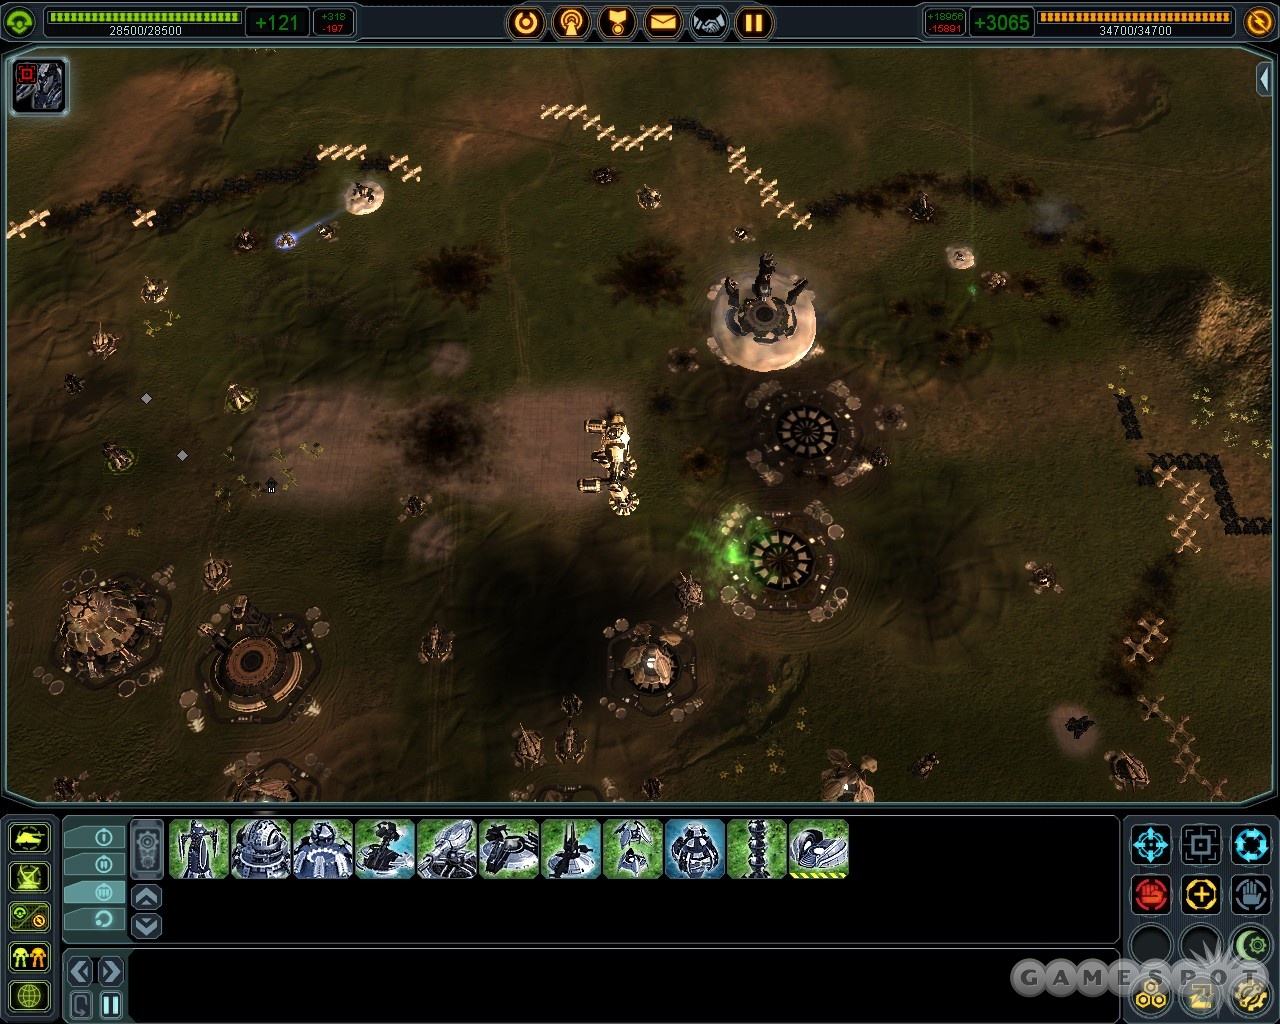 Marxon's base is heavily defended, so it's easiest to attack it from long range with artillery.